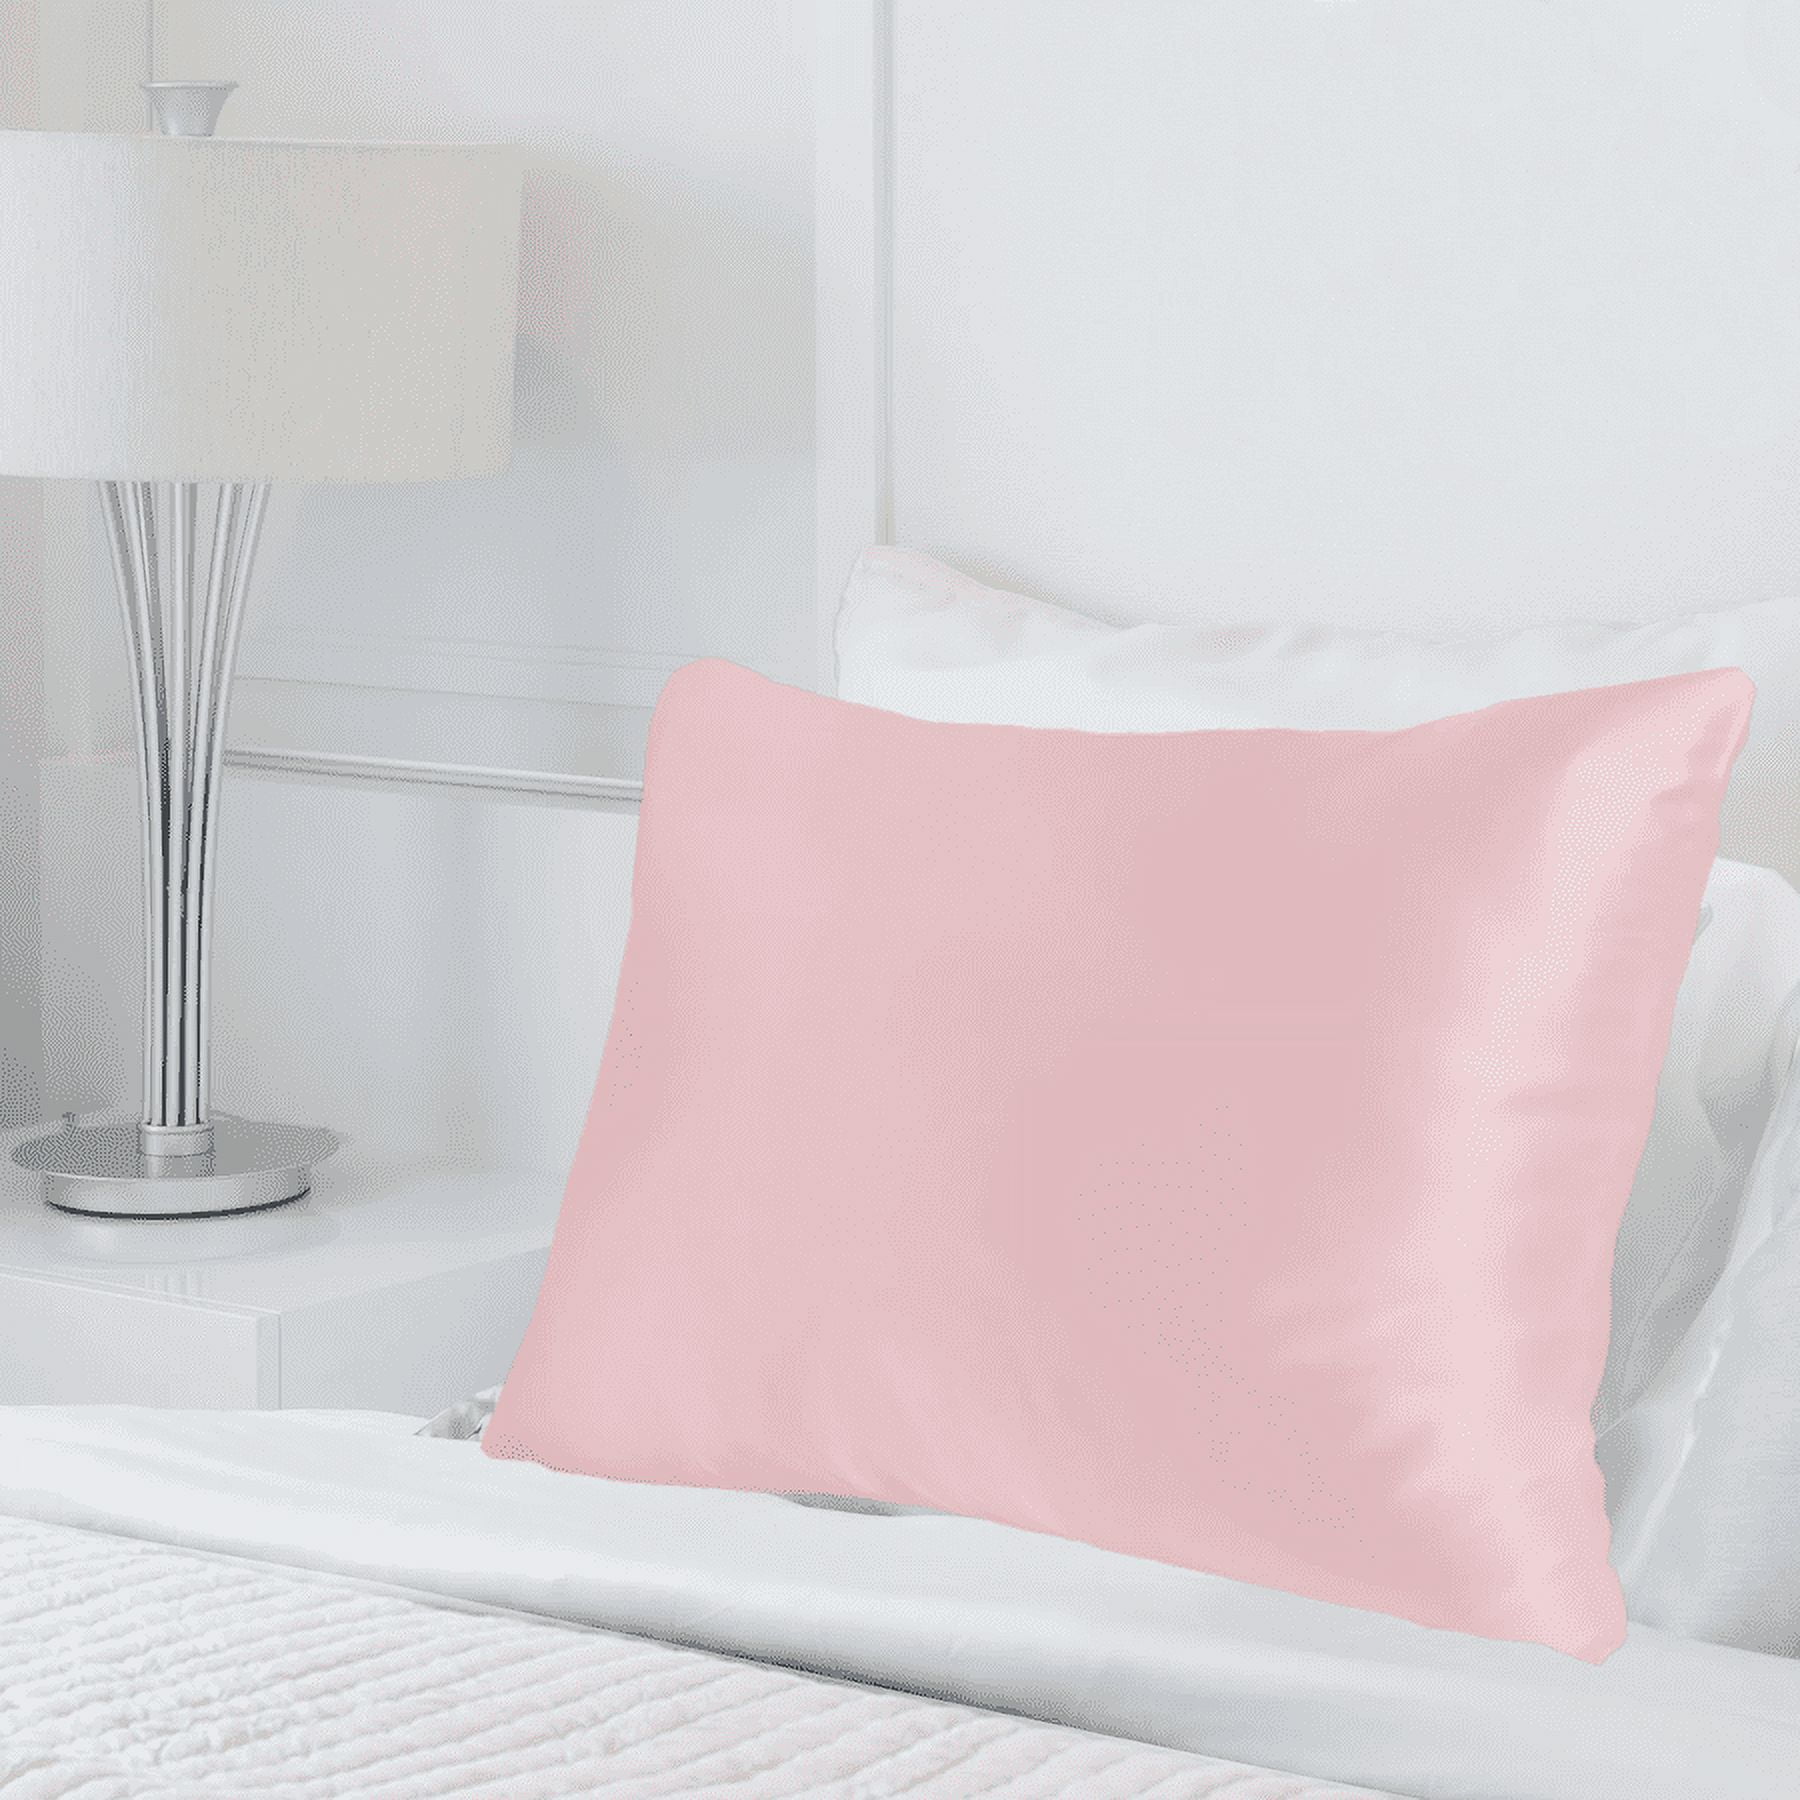 Luxury Mulberry Silk Pillowcase with Cotton Underside (25 momme)